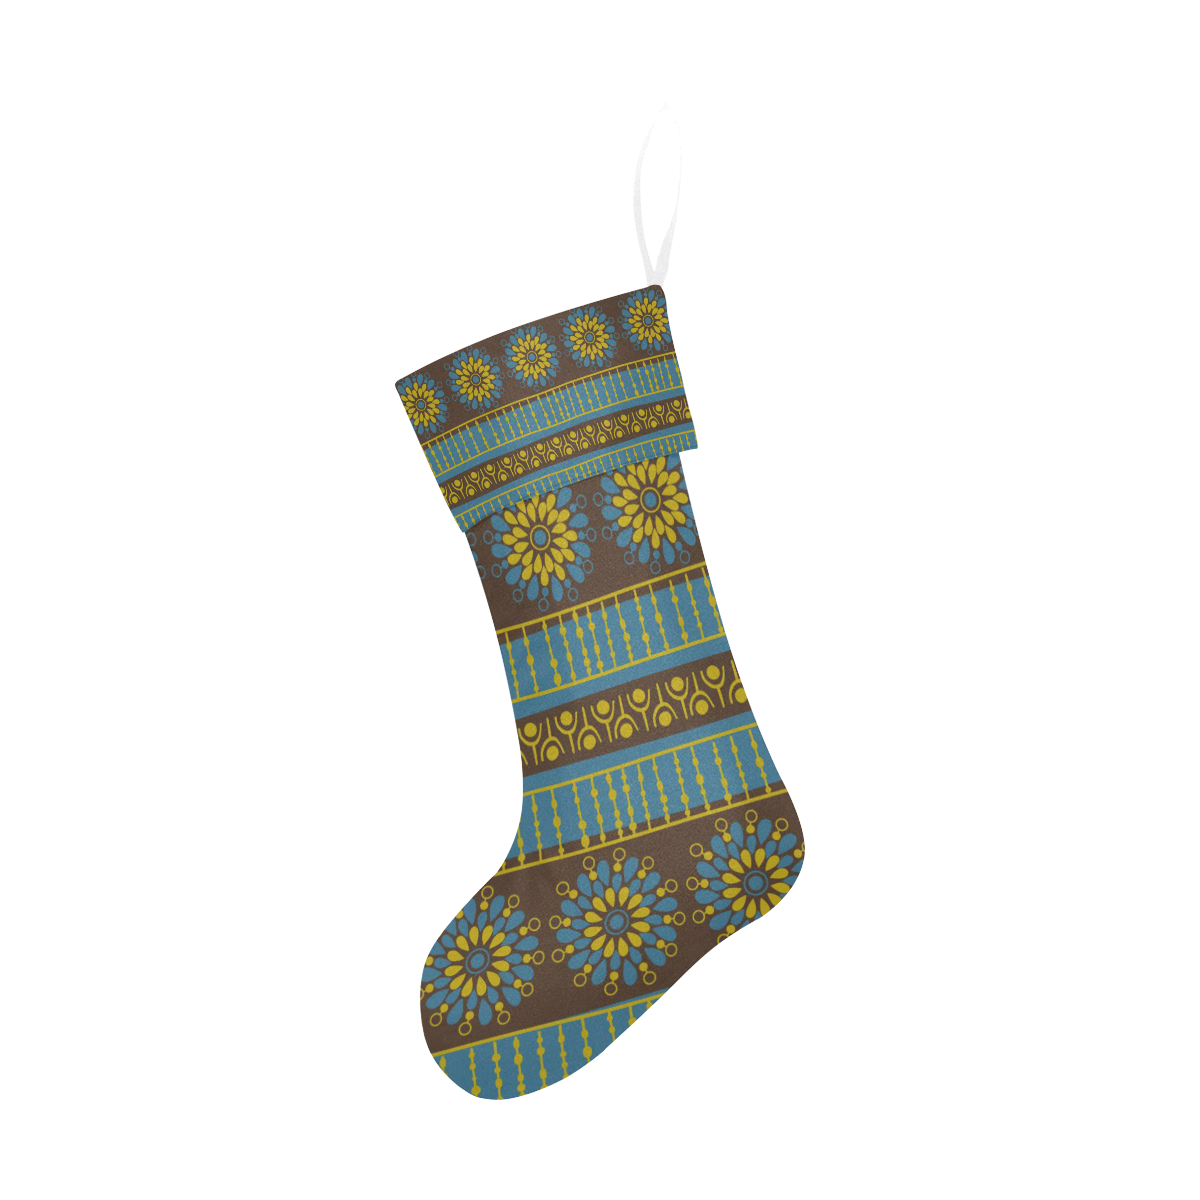 Ethnic BohemianTeal, Brown, and Green Christmas Stocking